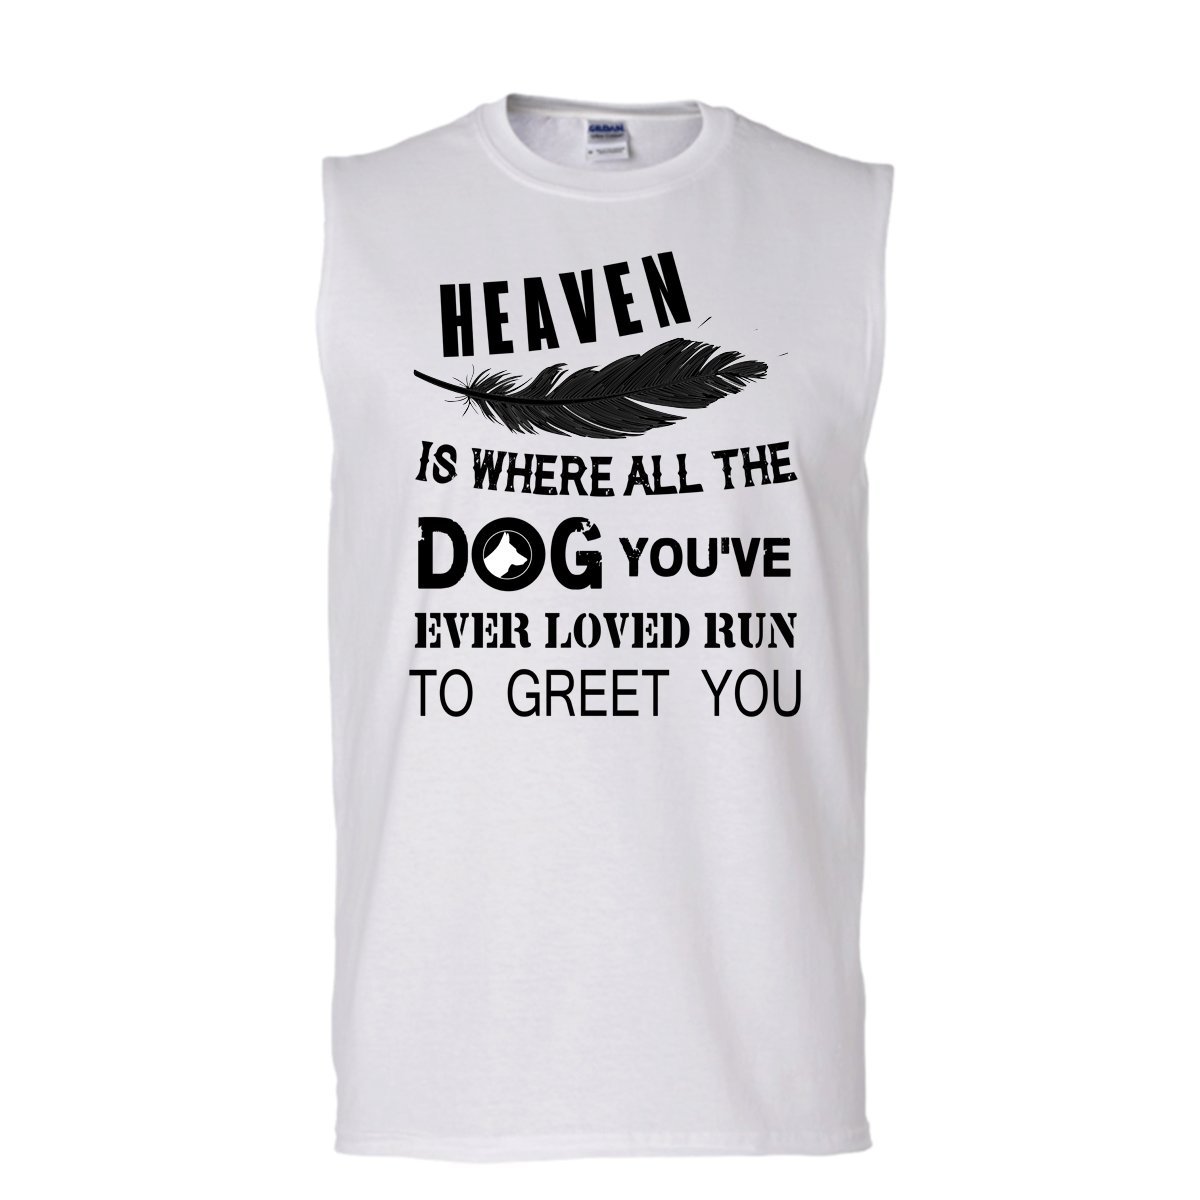 Heaven Is Where All The Dog T Shirt, My Dog T Shirt, Awesome t-shirts (Men's Cot - $26.99 - $29.99